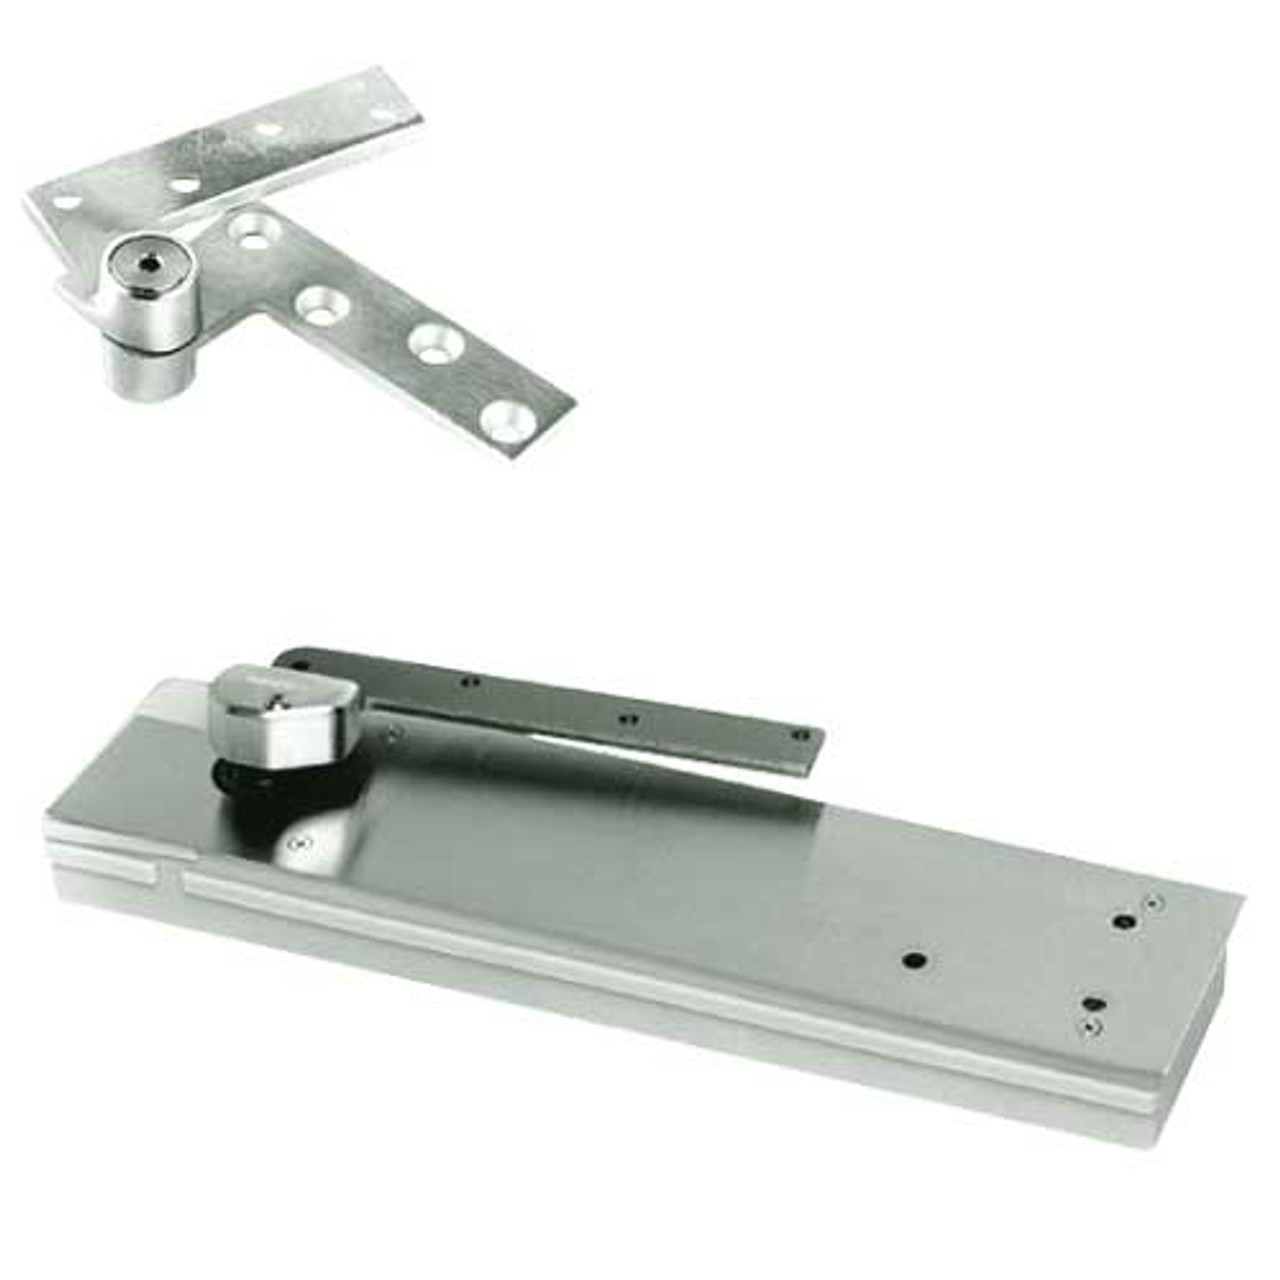 5103ABC105-1-1/2OS-LTP-RH-618 Rixson 51 Series 1-1/2" Offset Hung Shallow Depth Floor Closers in Bright Nickel Finish